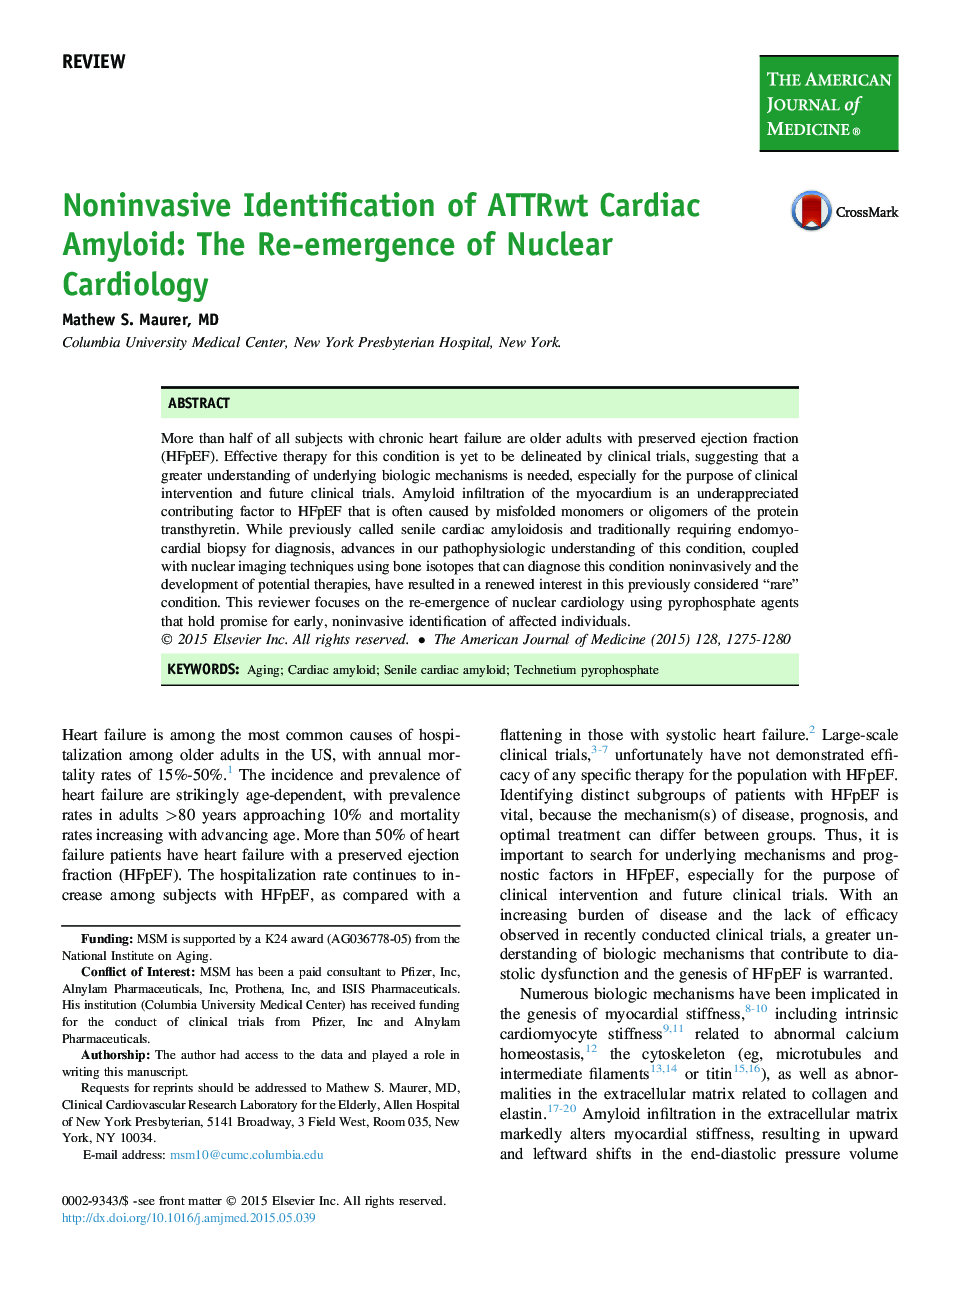 Noninvasive Identification of ATTRwt Cardiac Amyloid: The Re-emergence of Nuclear Cardiology 